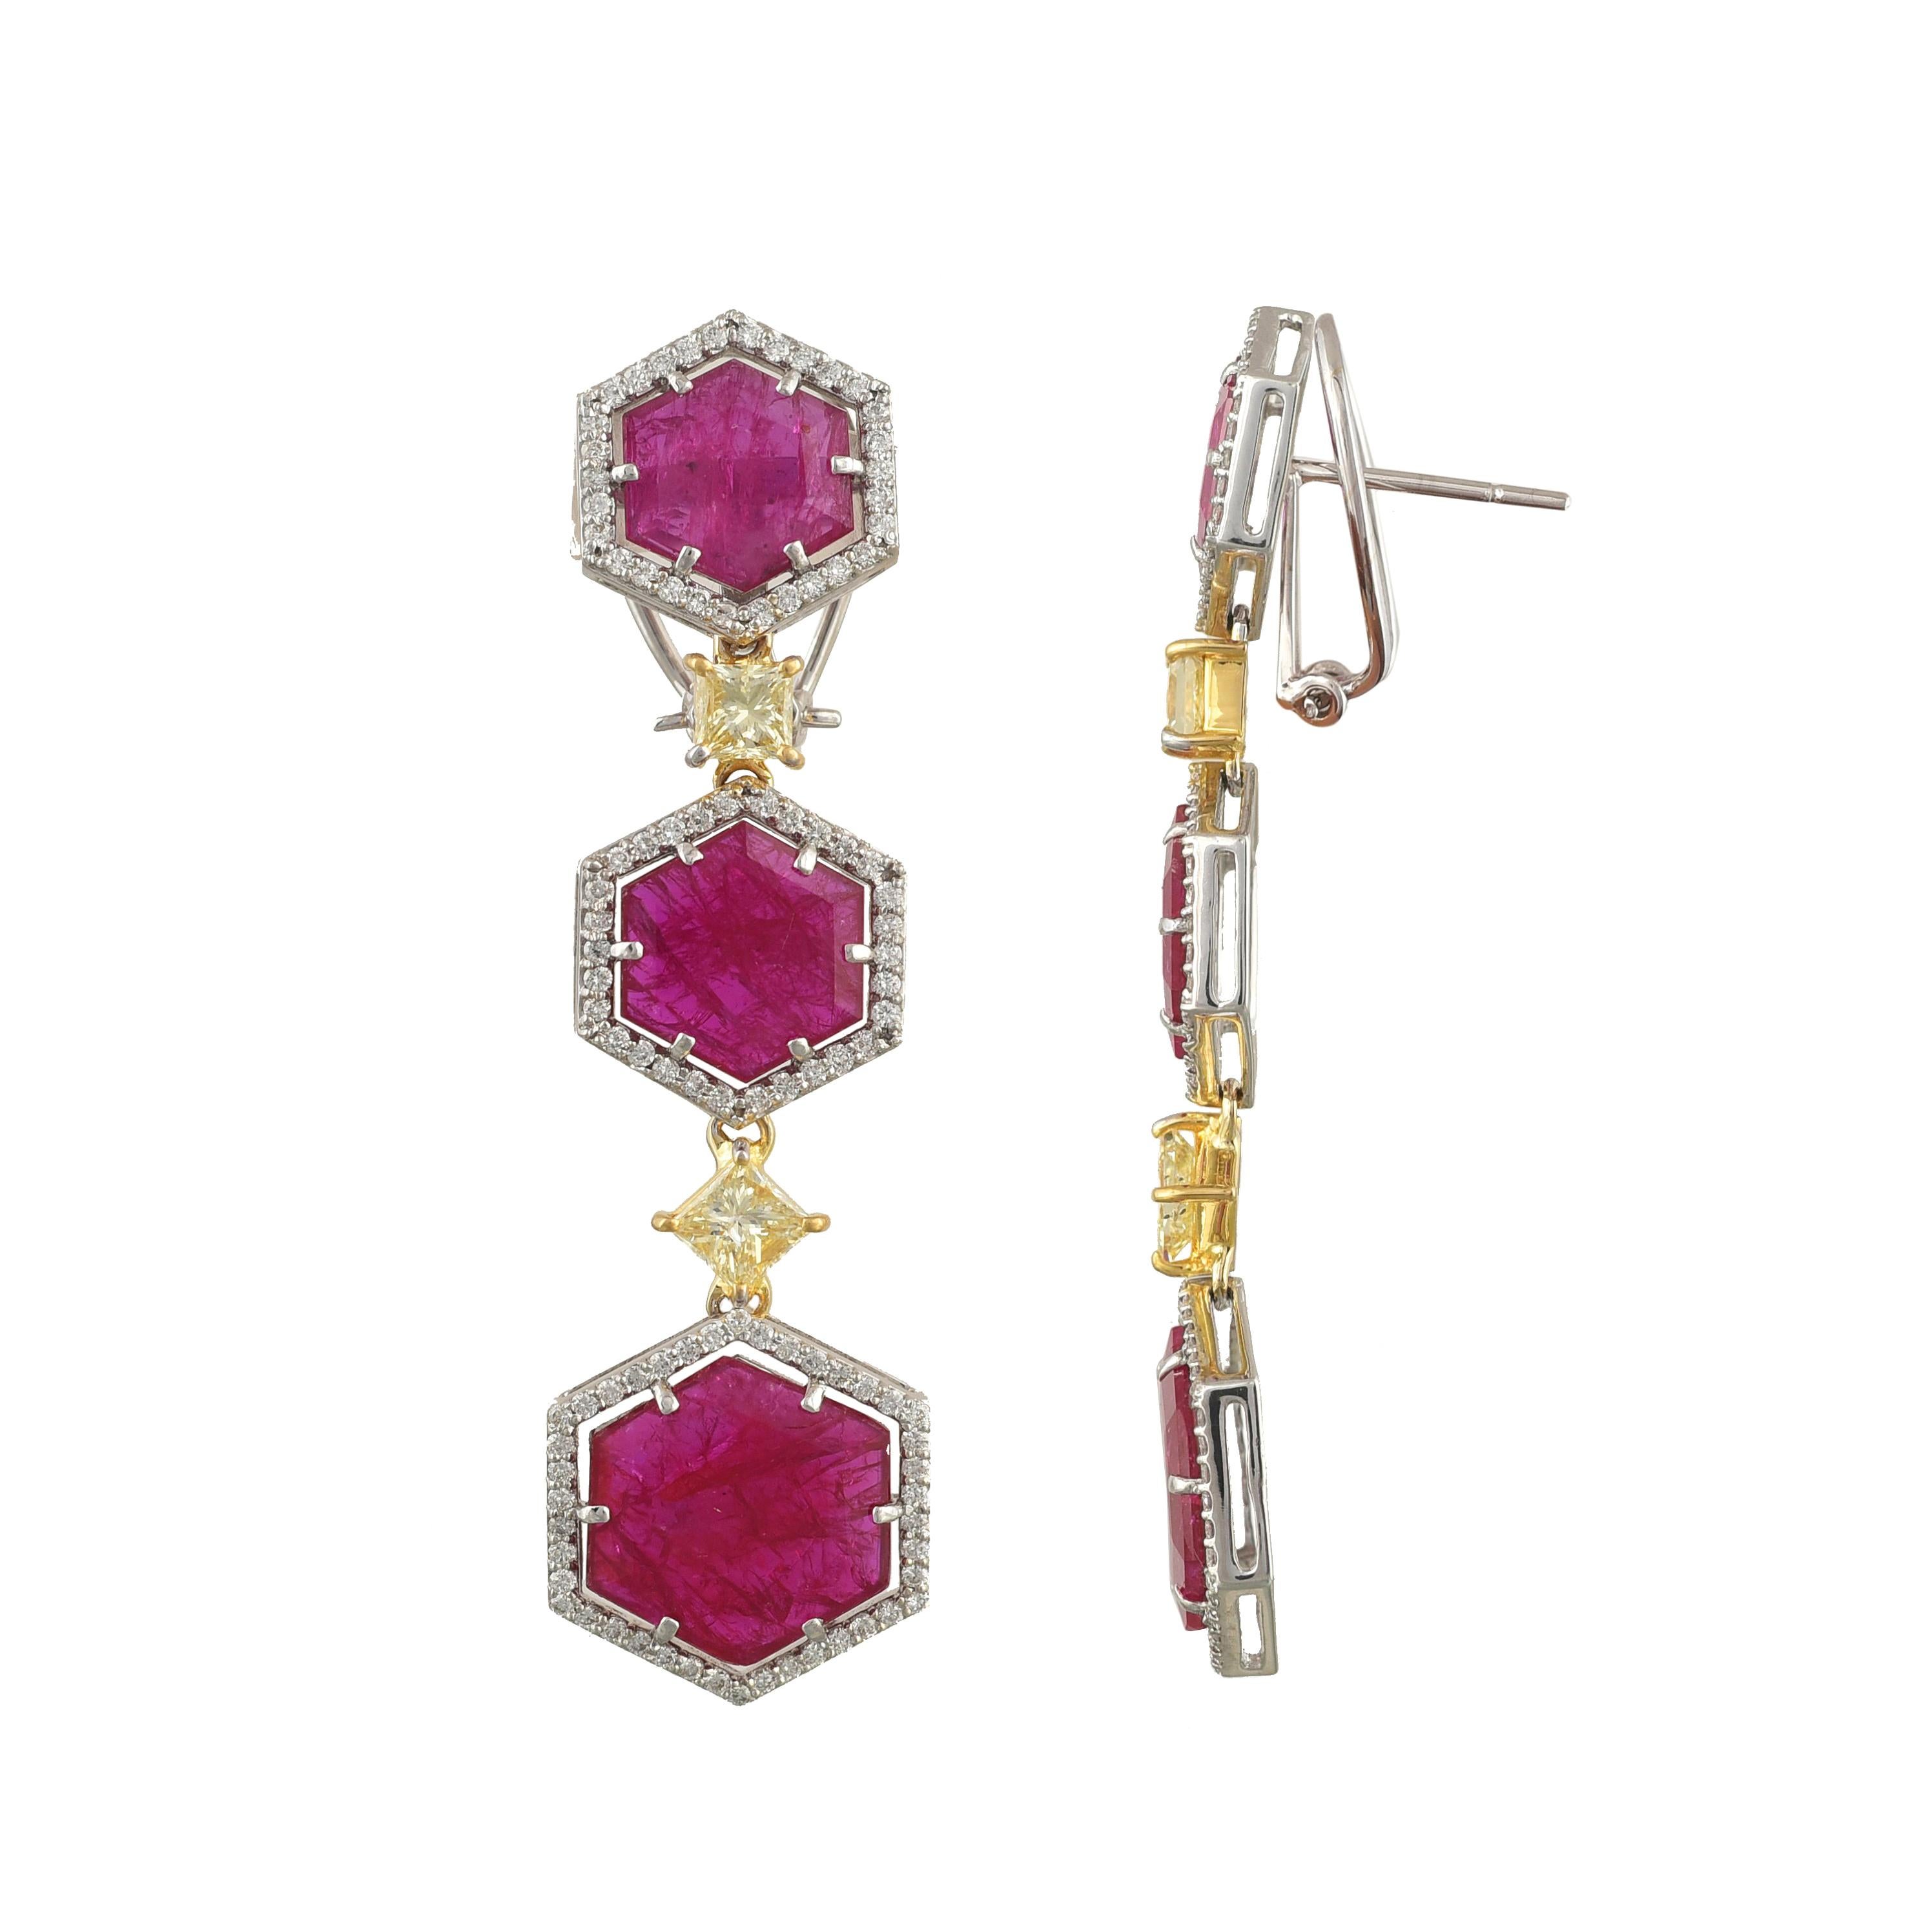 Set in 18K gold, natural Mozambique Ruby and Princess Yellow Diamond Earrings